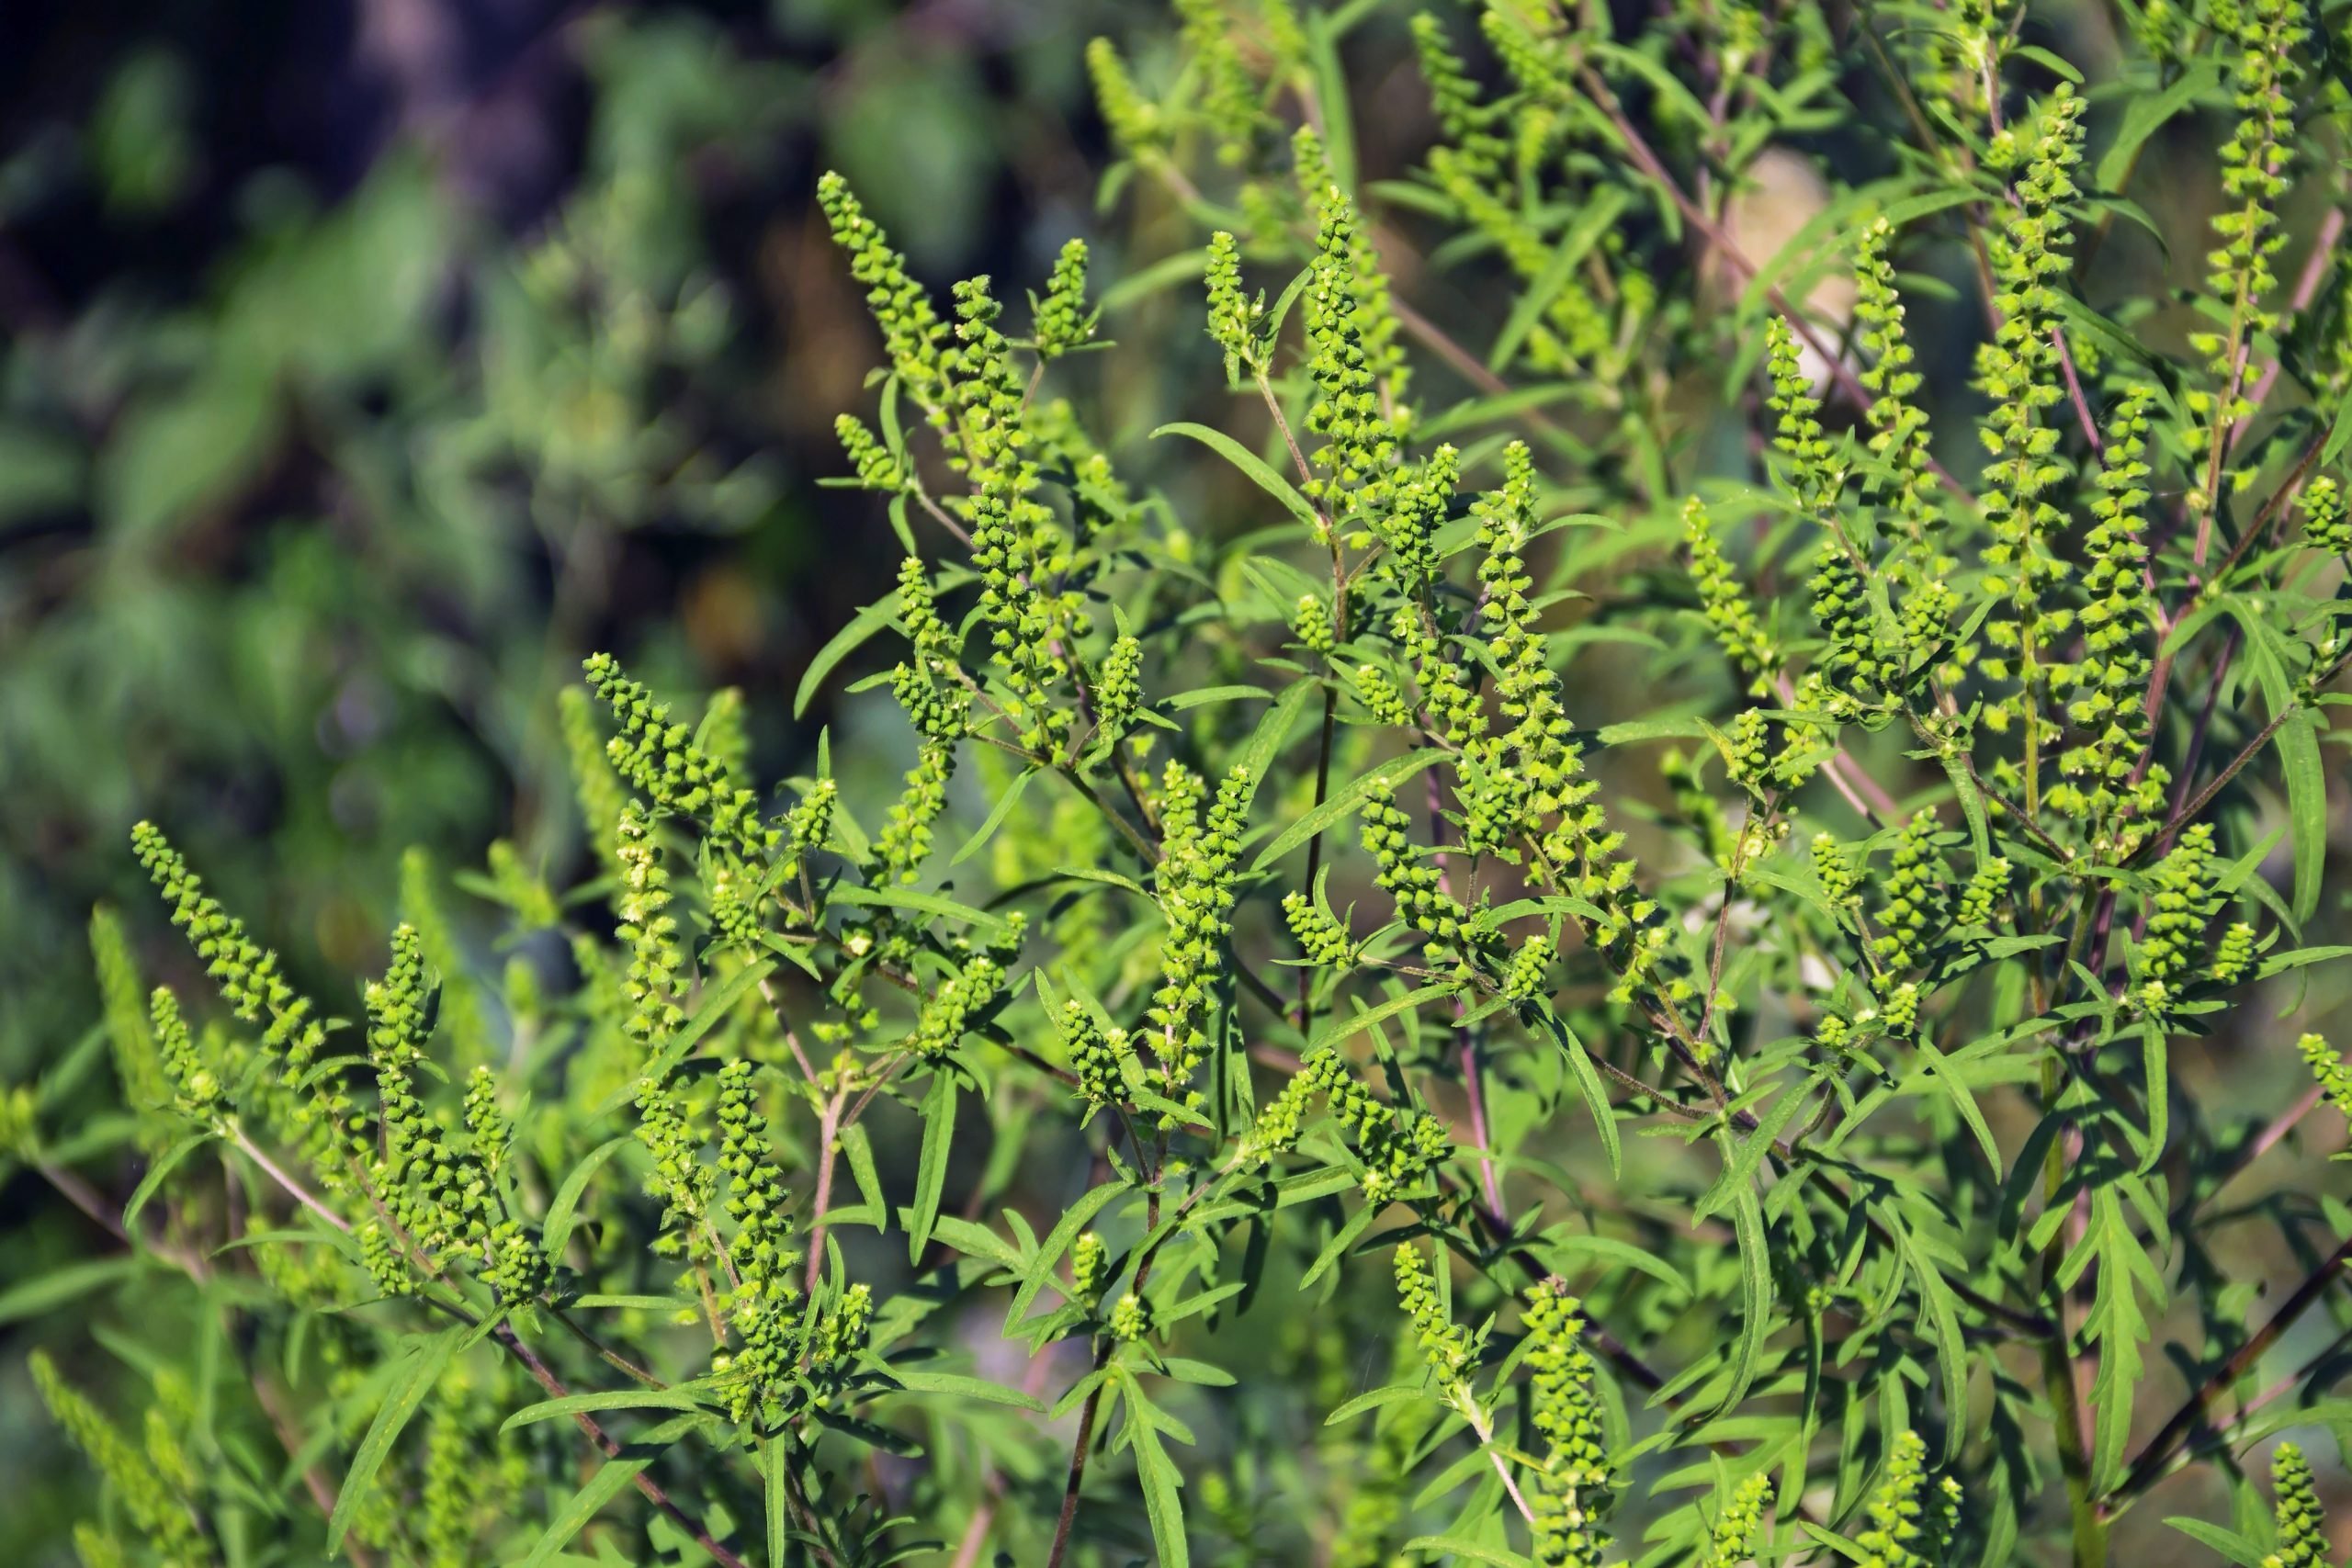 Ragweed vs Goldenrod: What’s Growing in Your Yard?